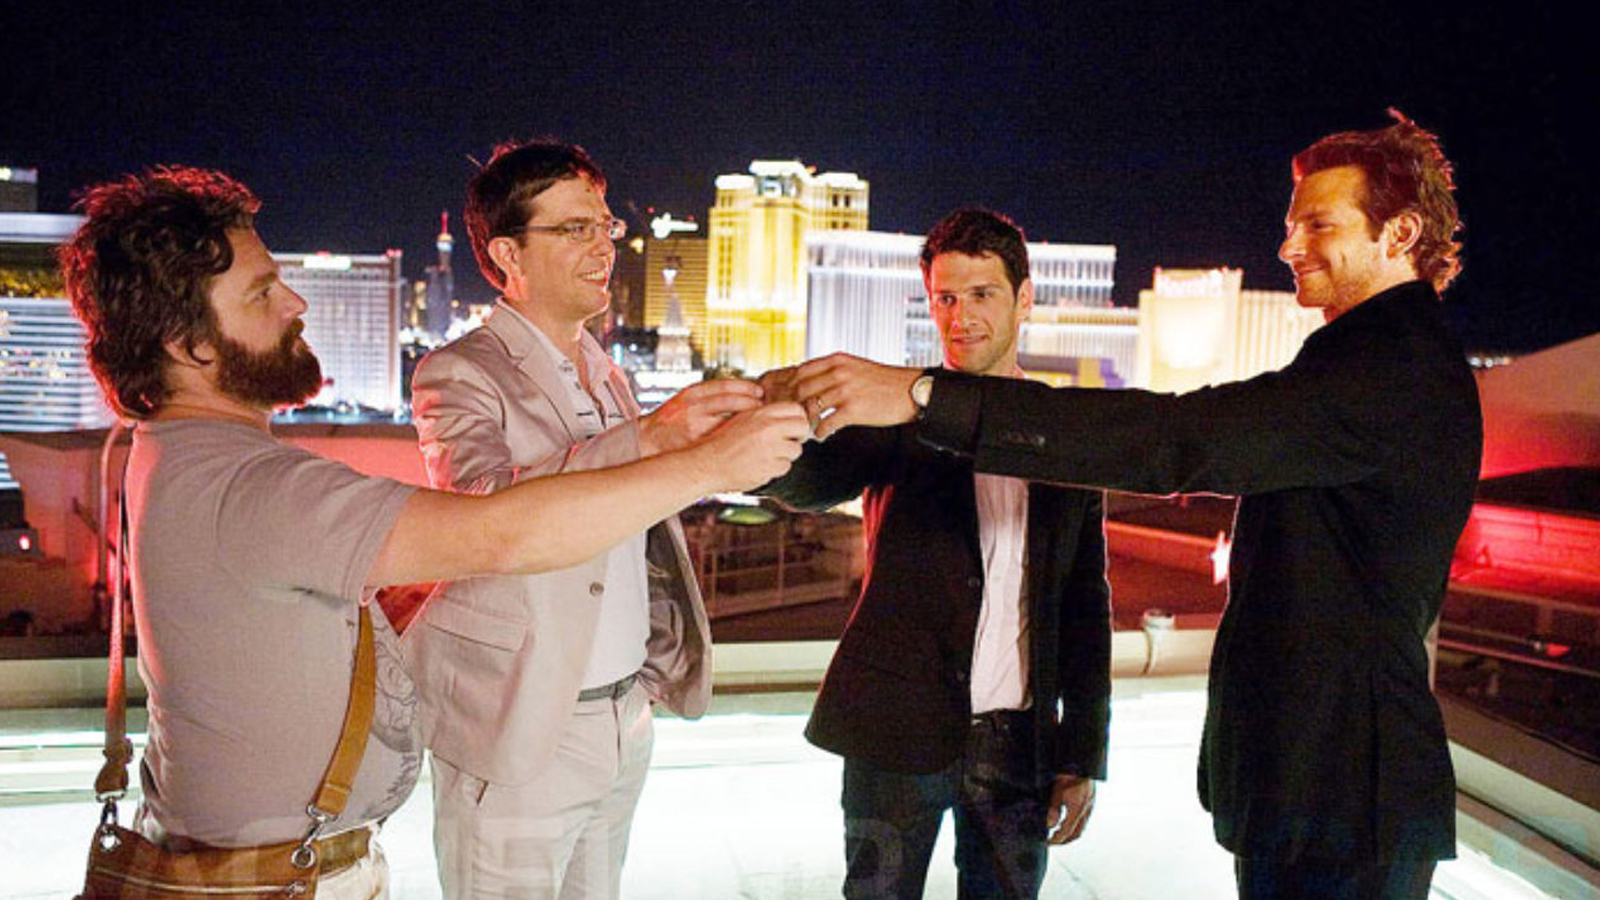 Films Like The Hangover Have Given ‘Boys Trips’ An Unfair Reputation